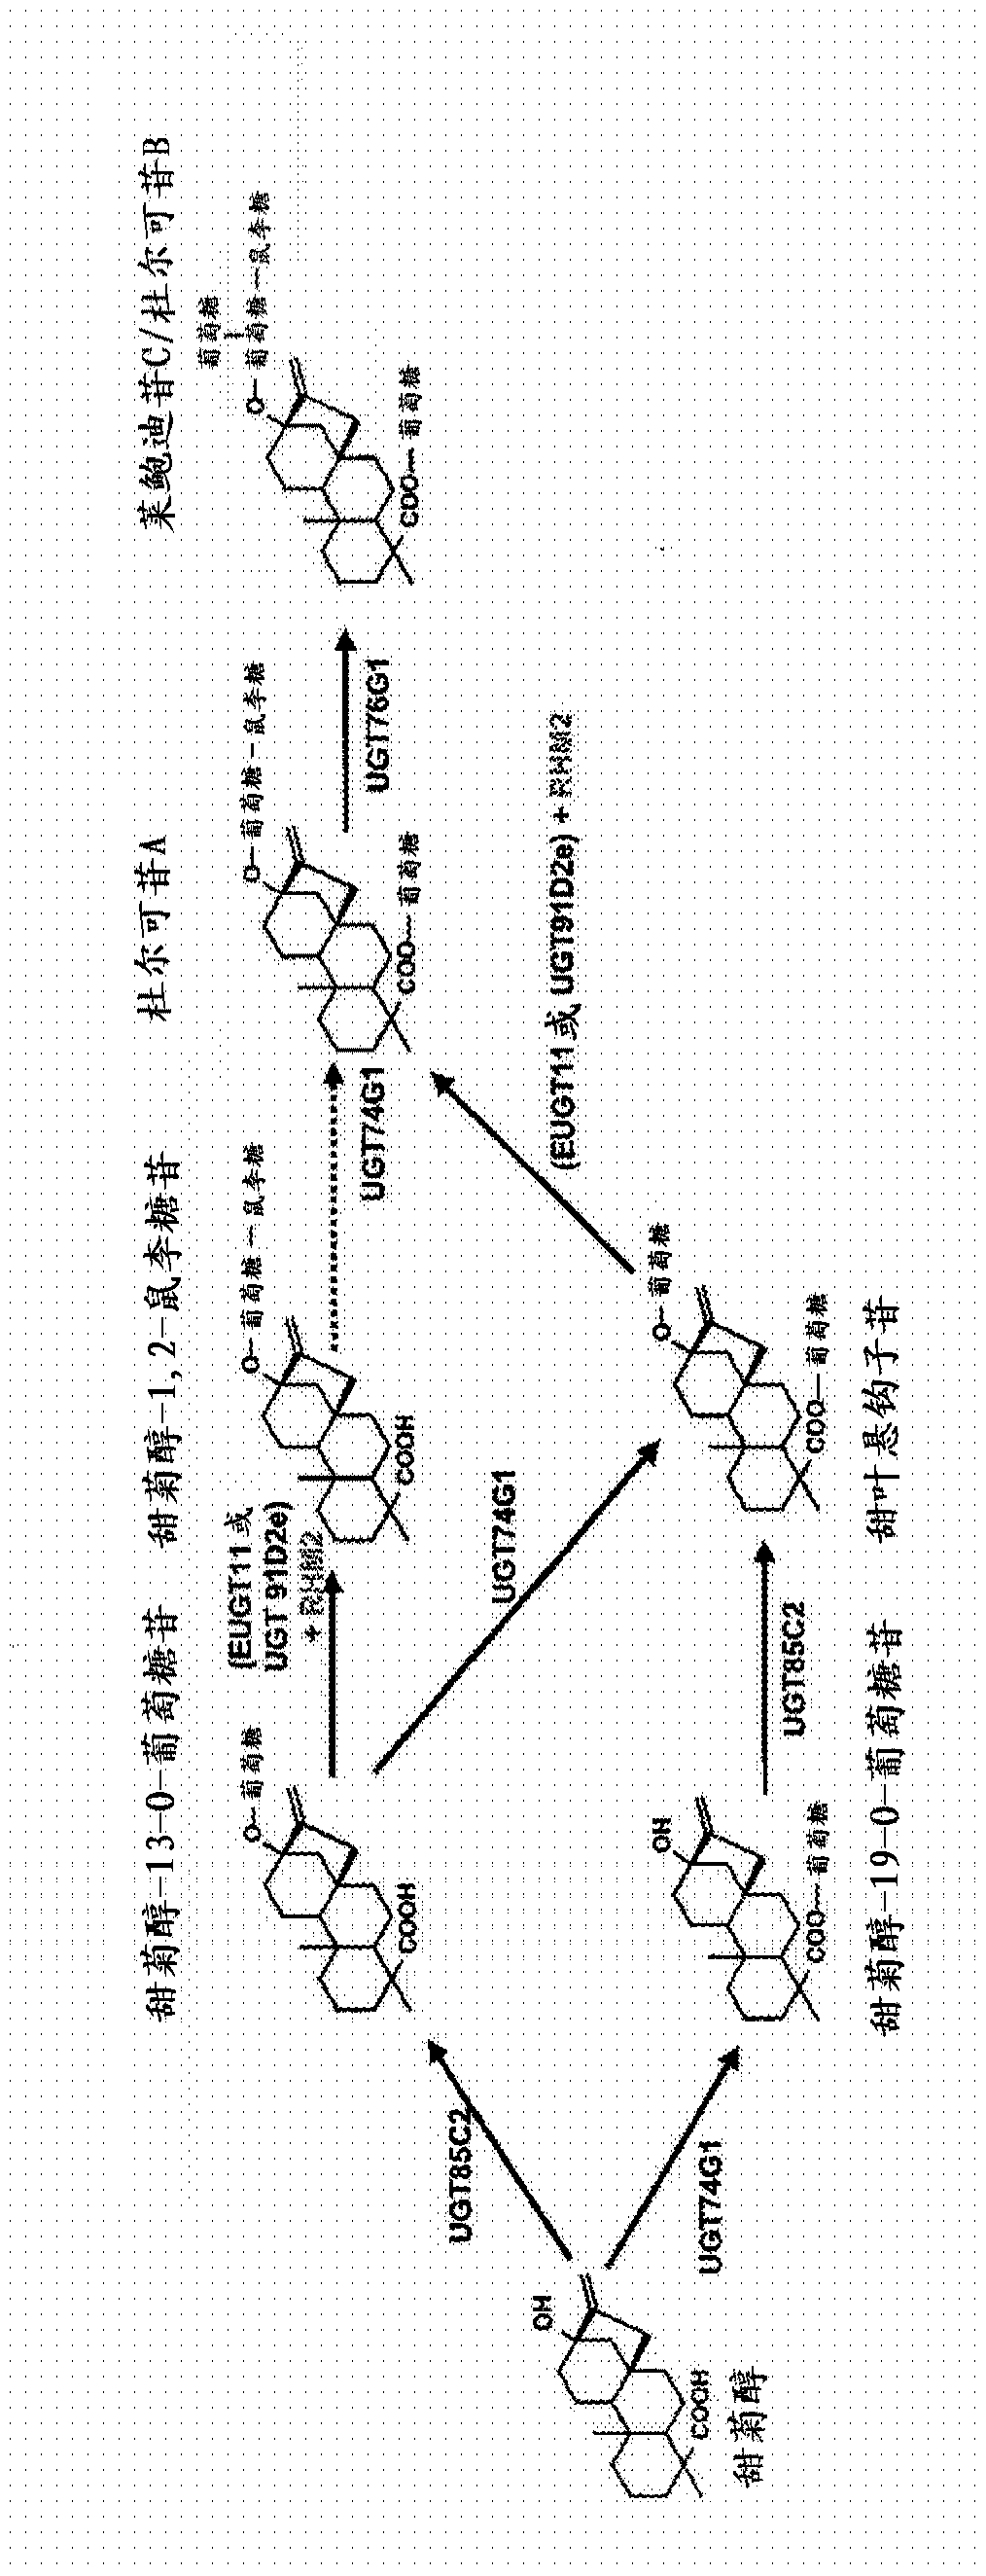 Recombinant production of steviol glycosides